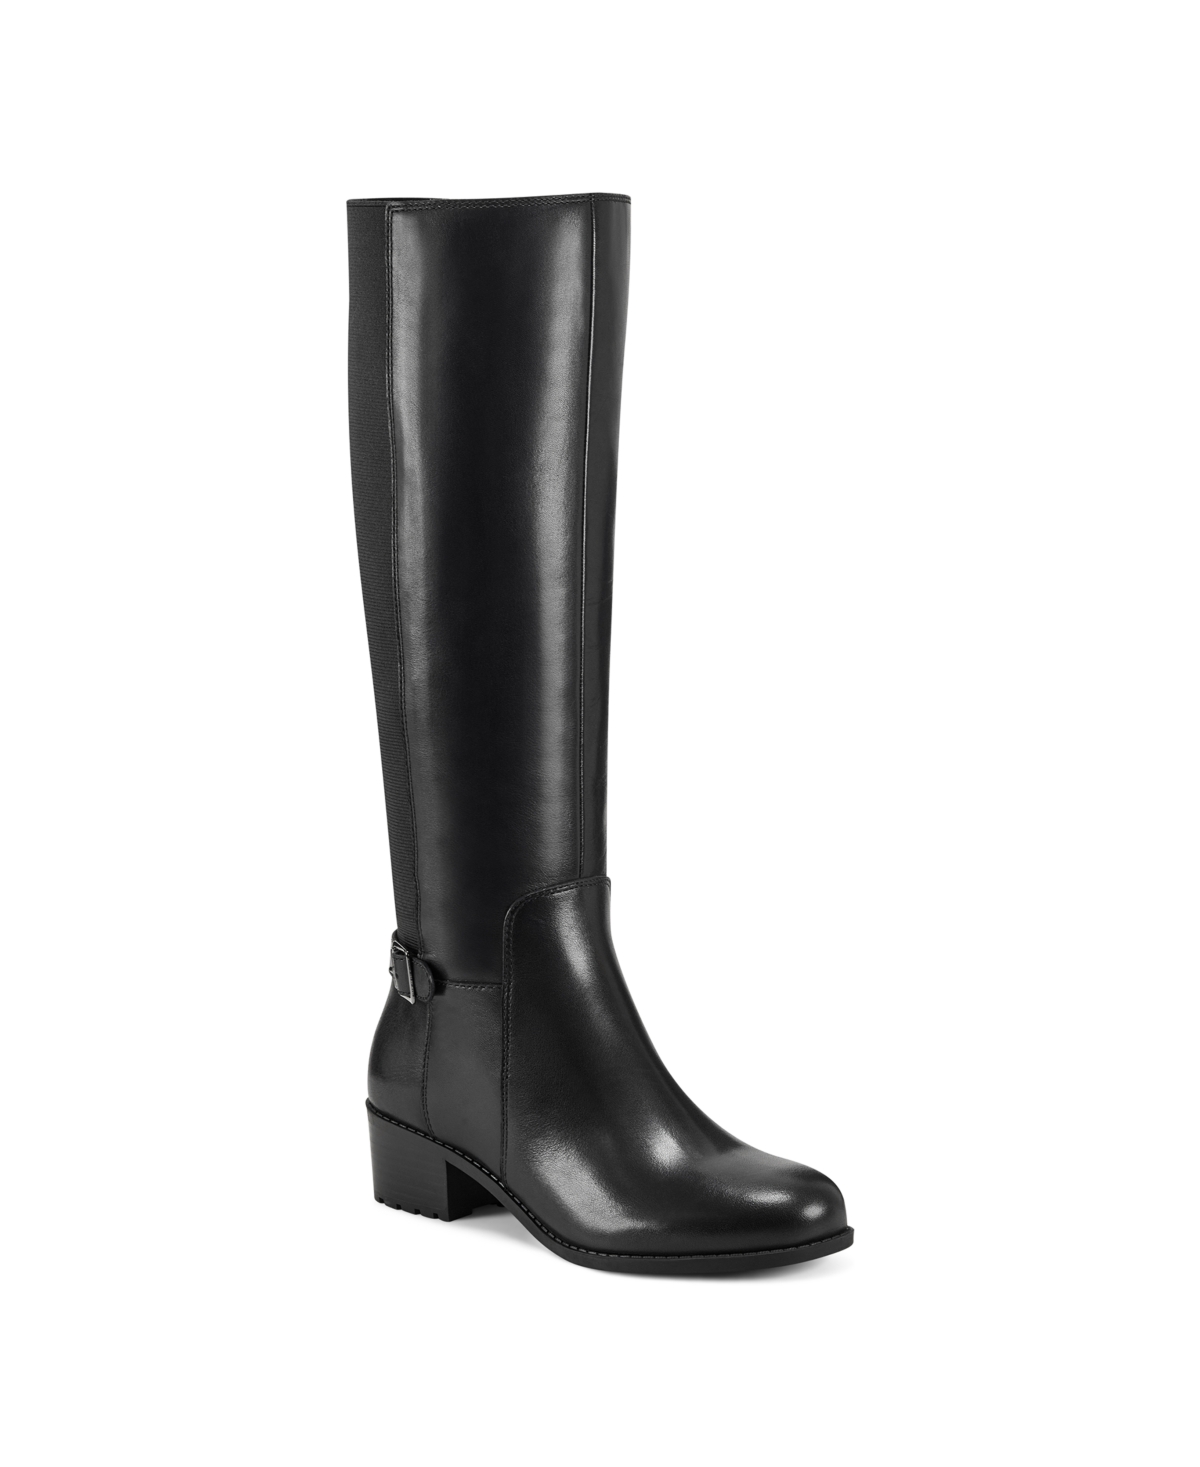 UPC 195608202458 product image for Easy Spirit Women's Chaza Tall Regular Calf Boots Women's Shoes | upcitemdb.com